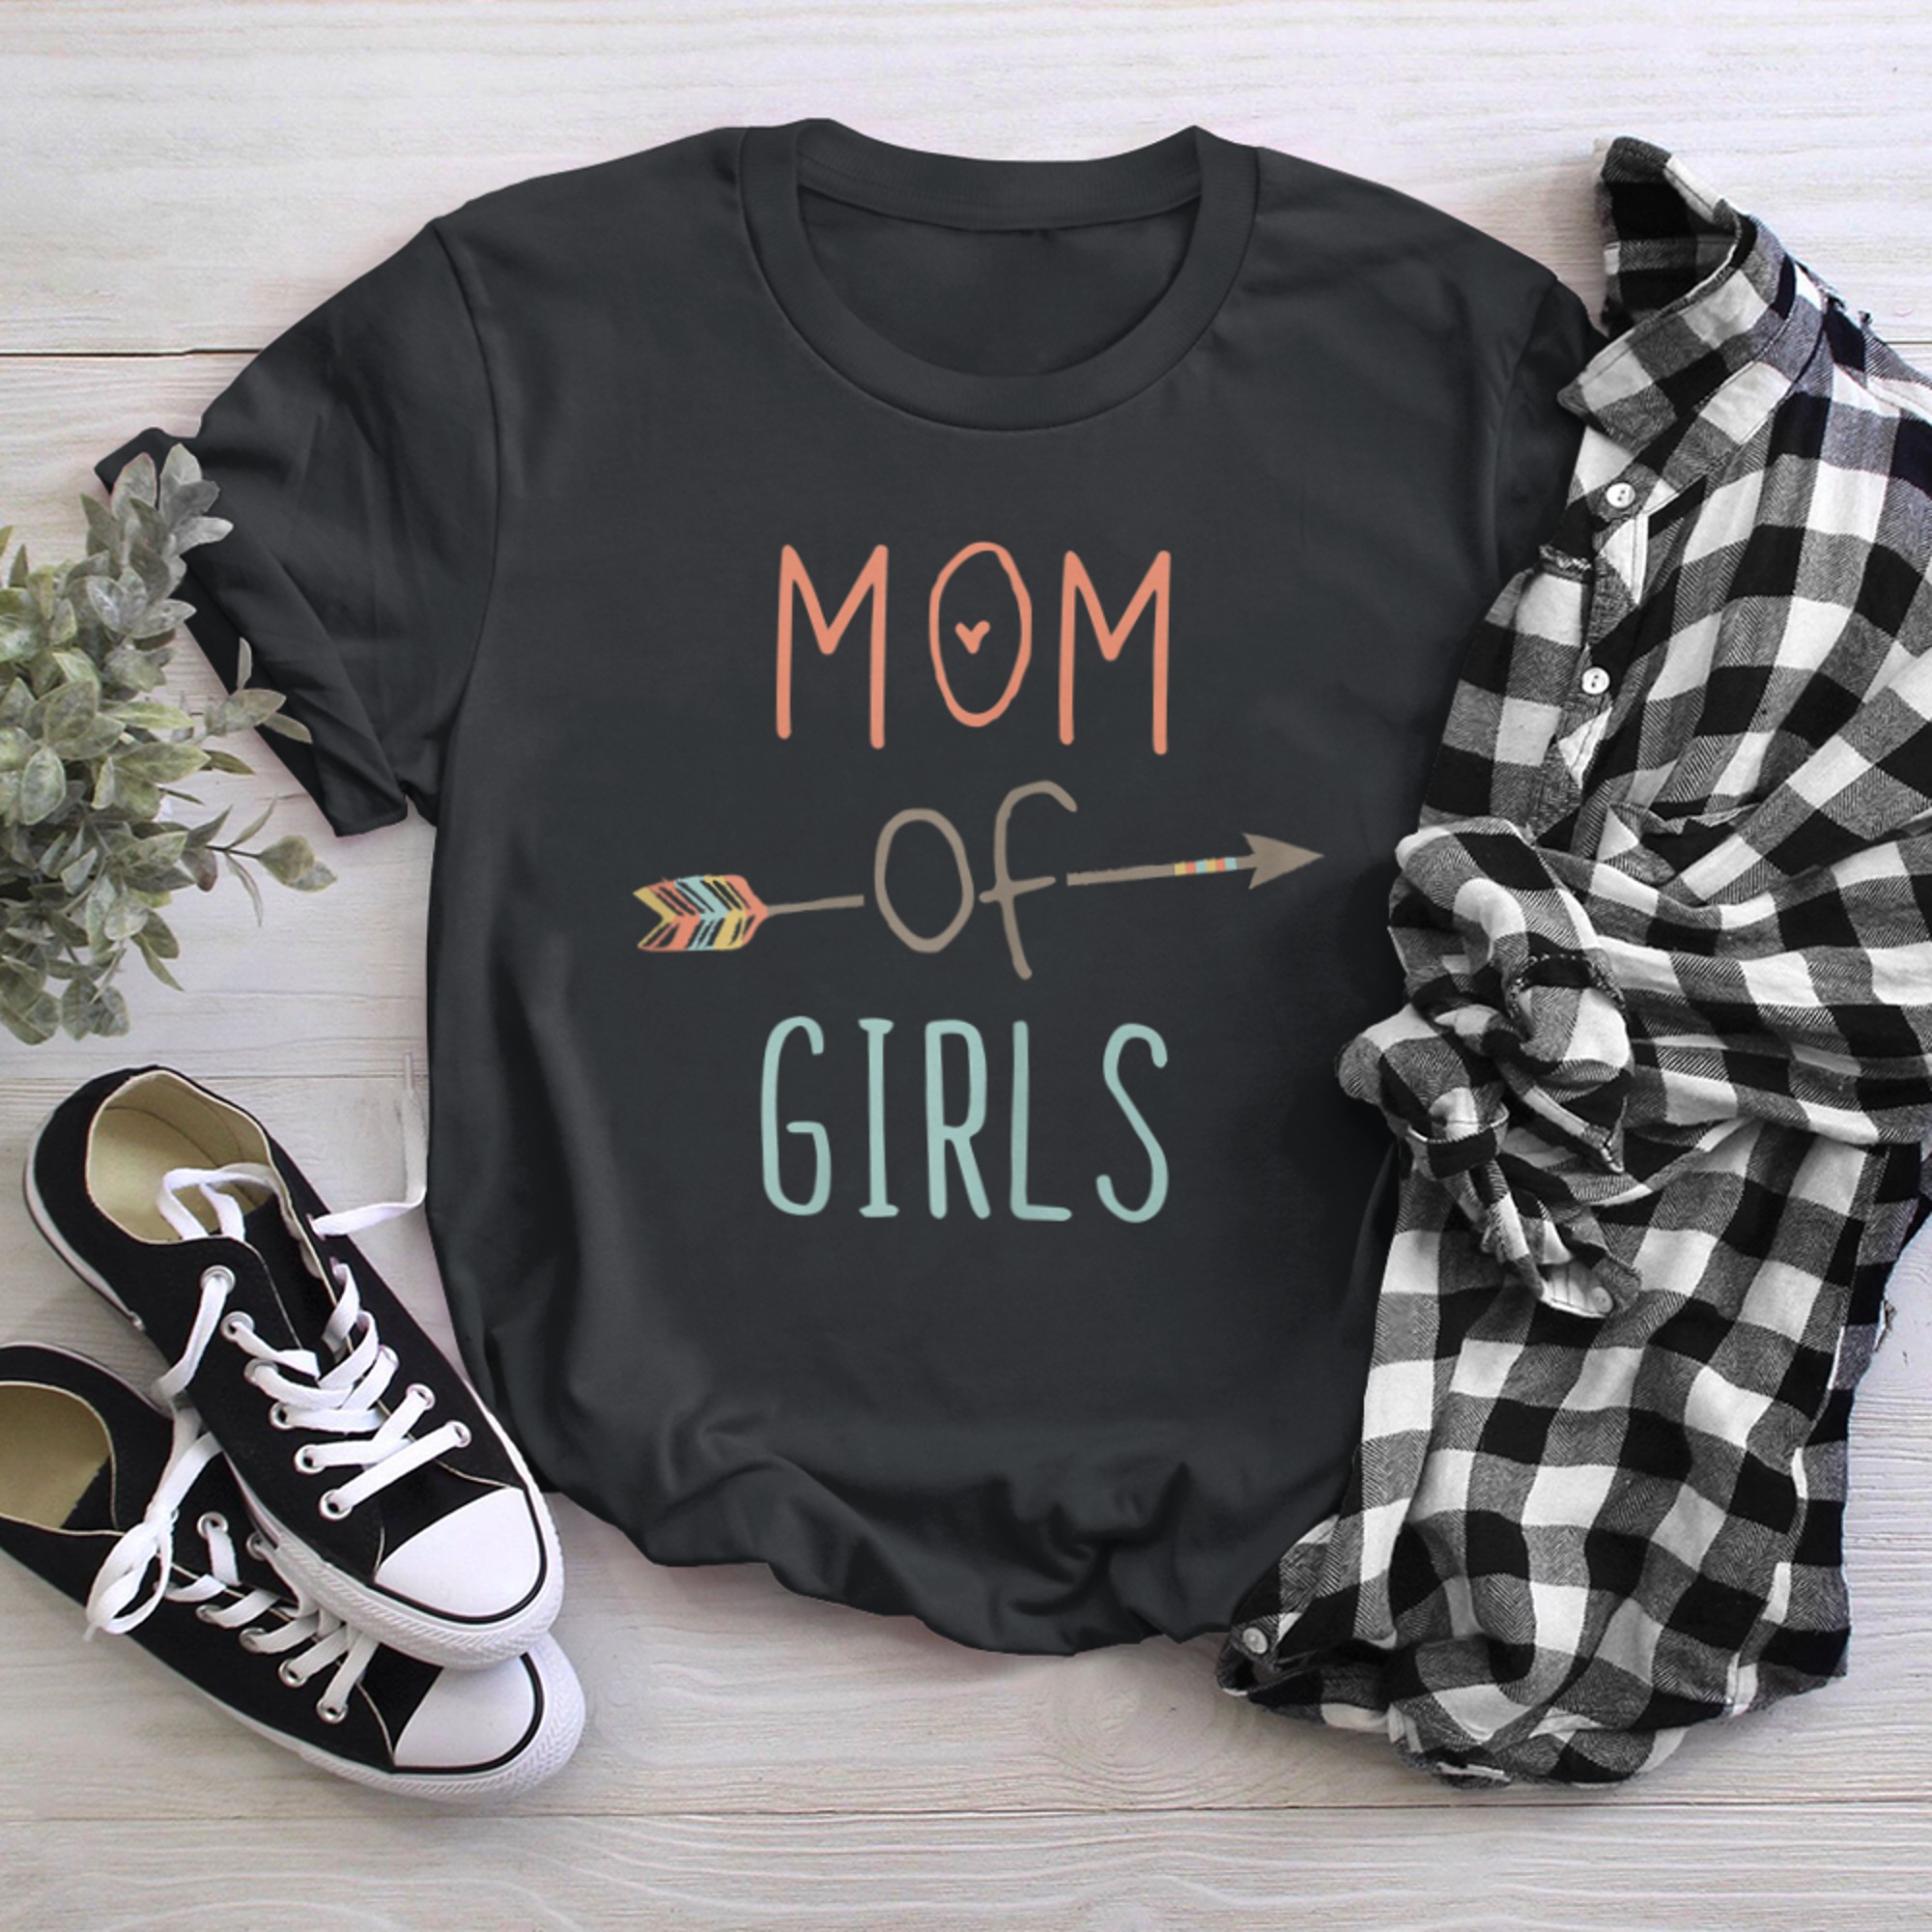 Mom of Mothers Day (1) t-shirt black